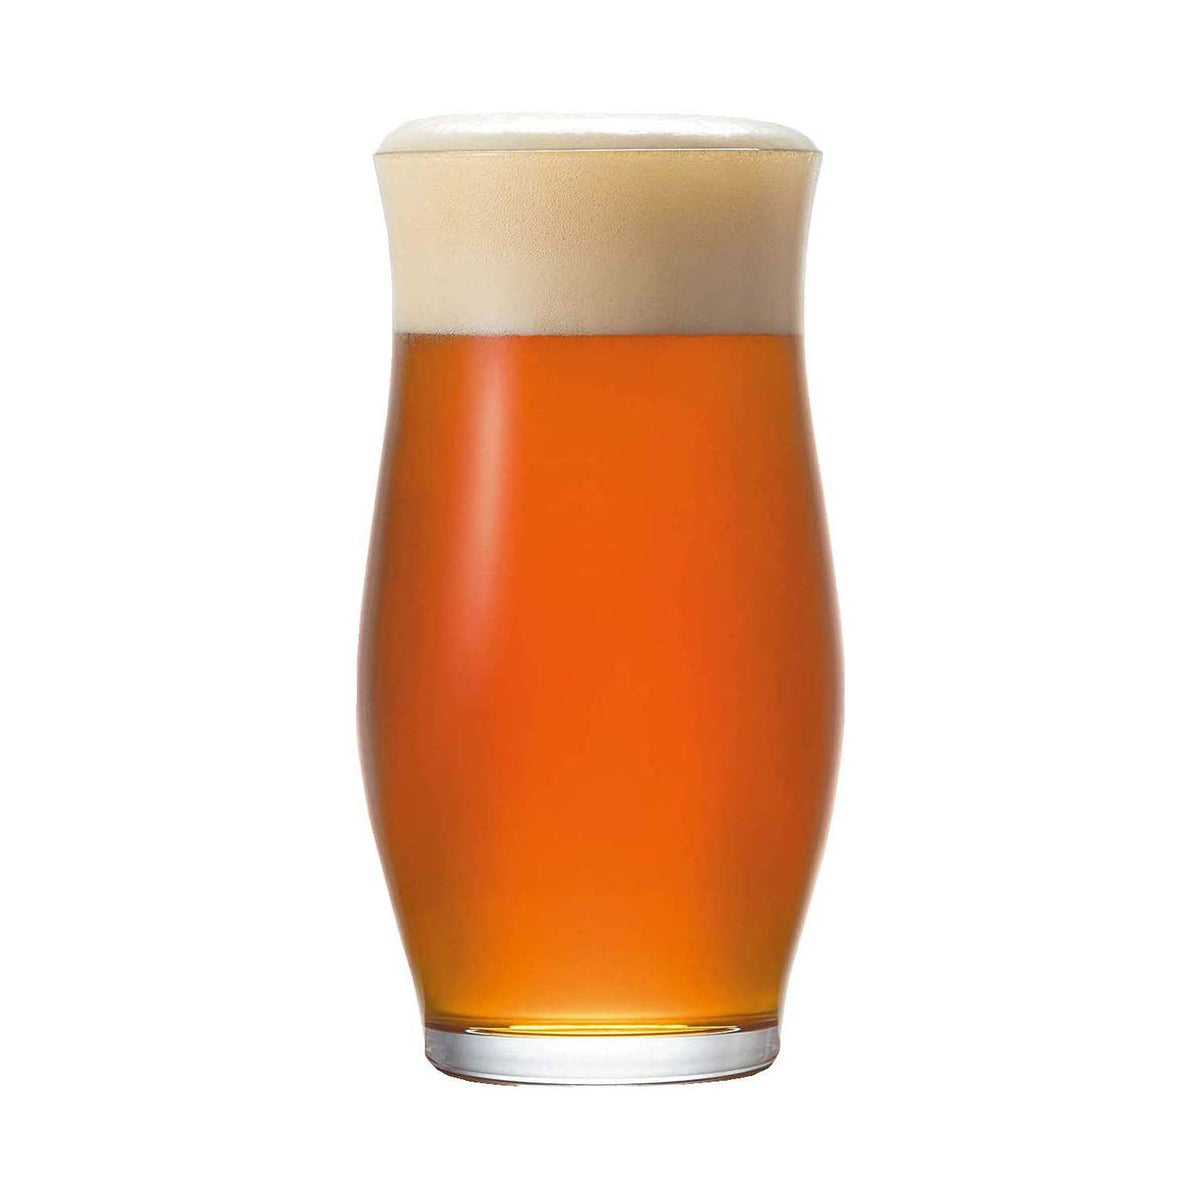 ADERIA Craft Beer Glass for Flavorful Taste